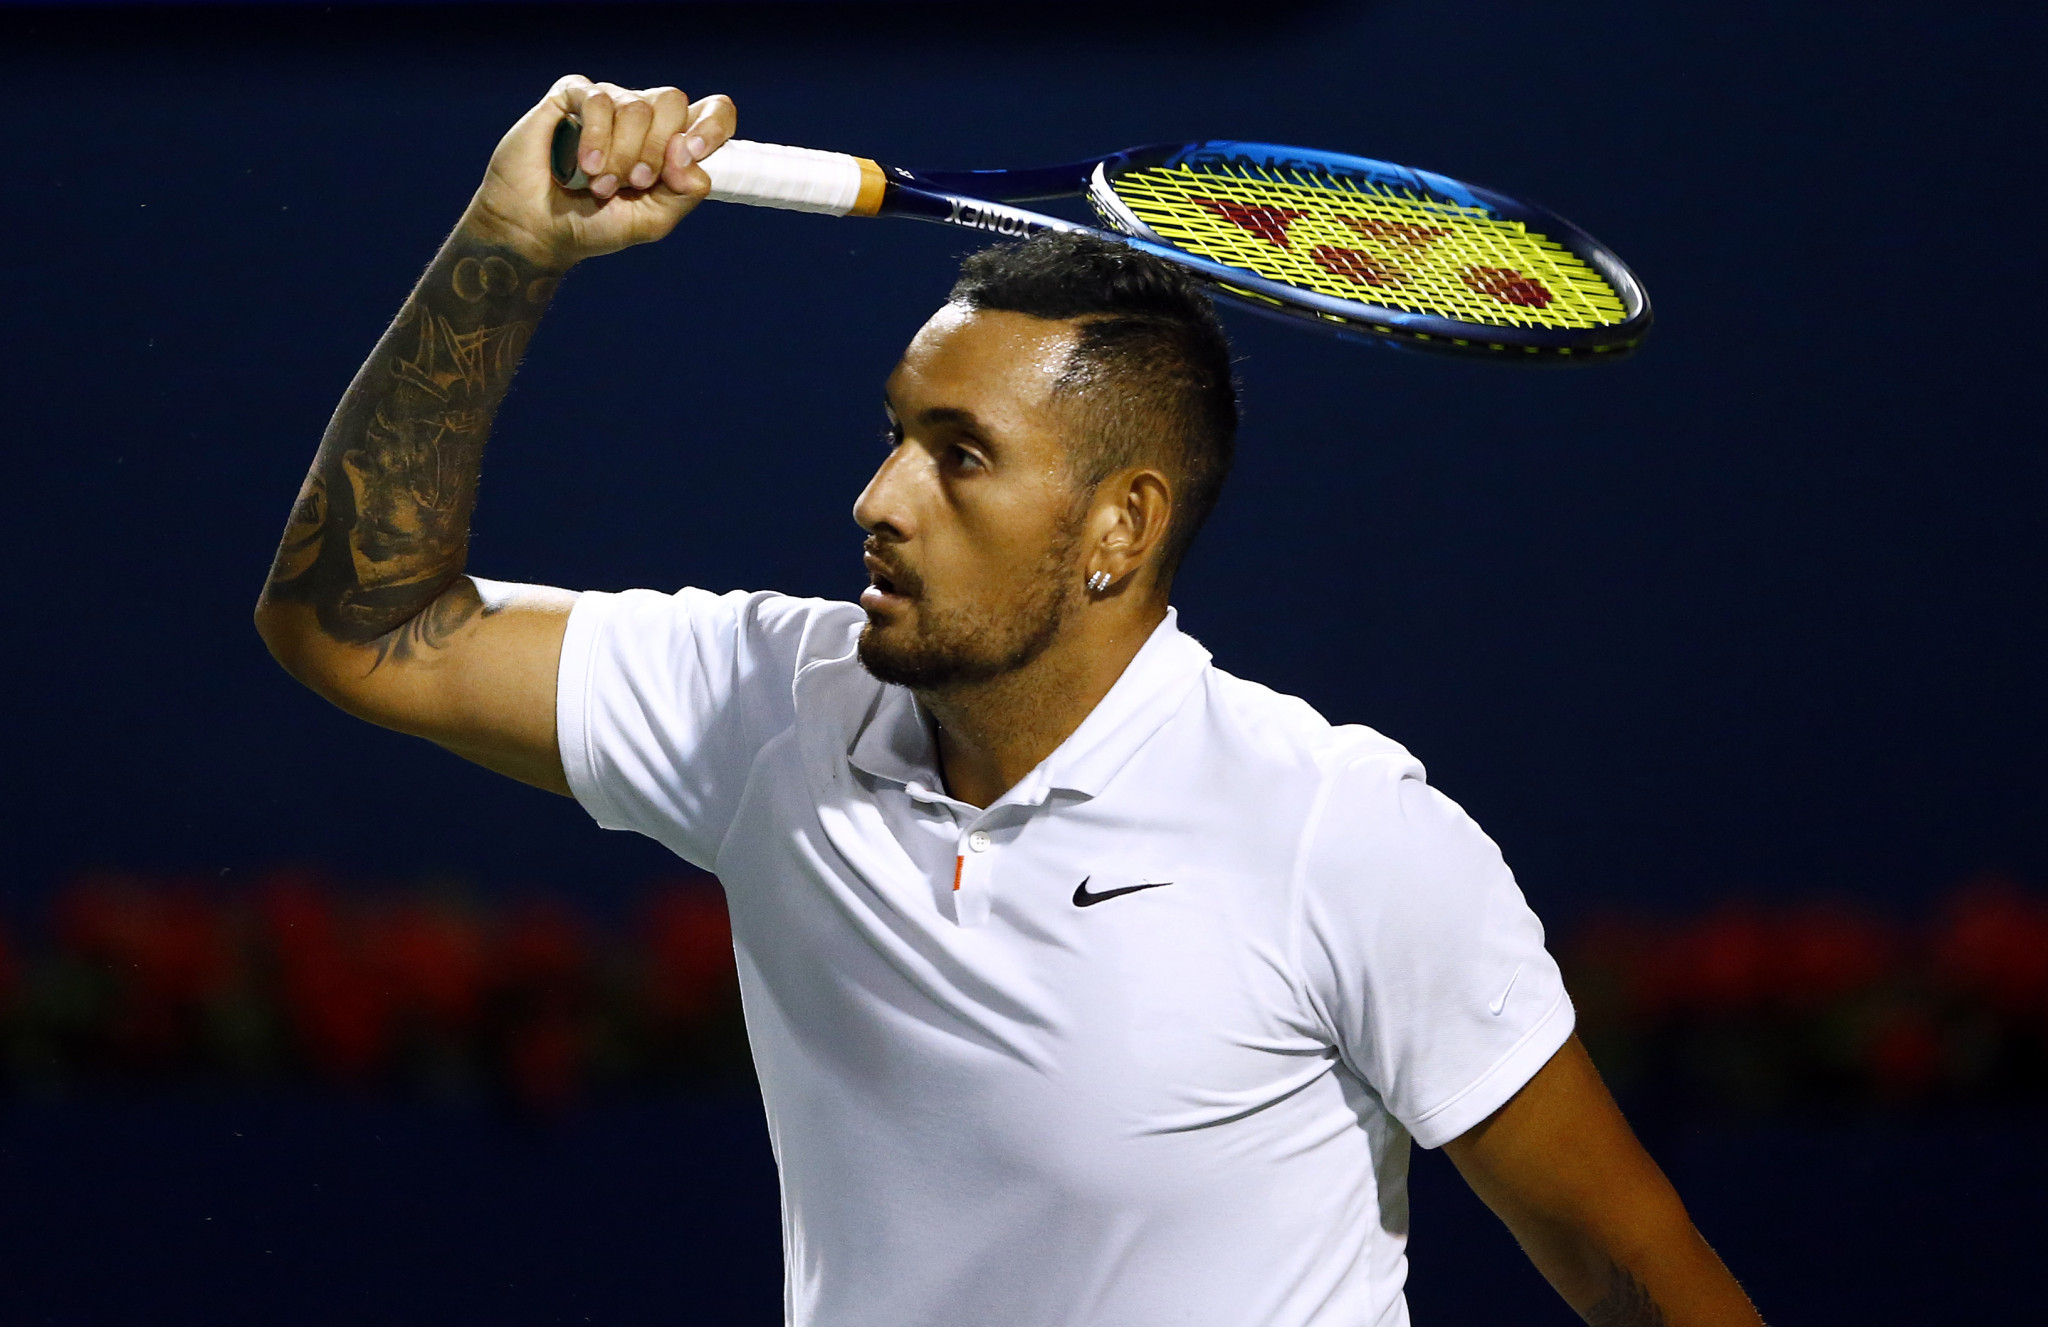 Nick Kyrgios was defeated in three sets by Reilly Opelka in a battle of the big servers at the Canadian Open ©Getty Images